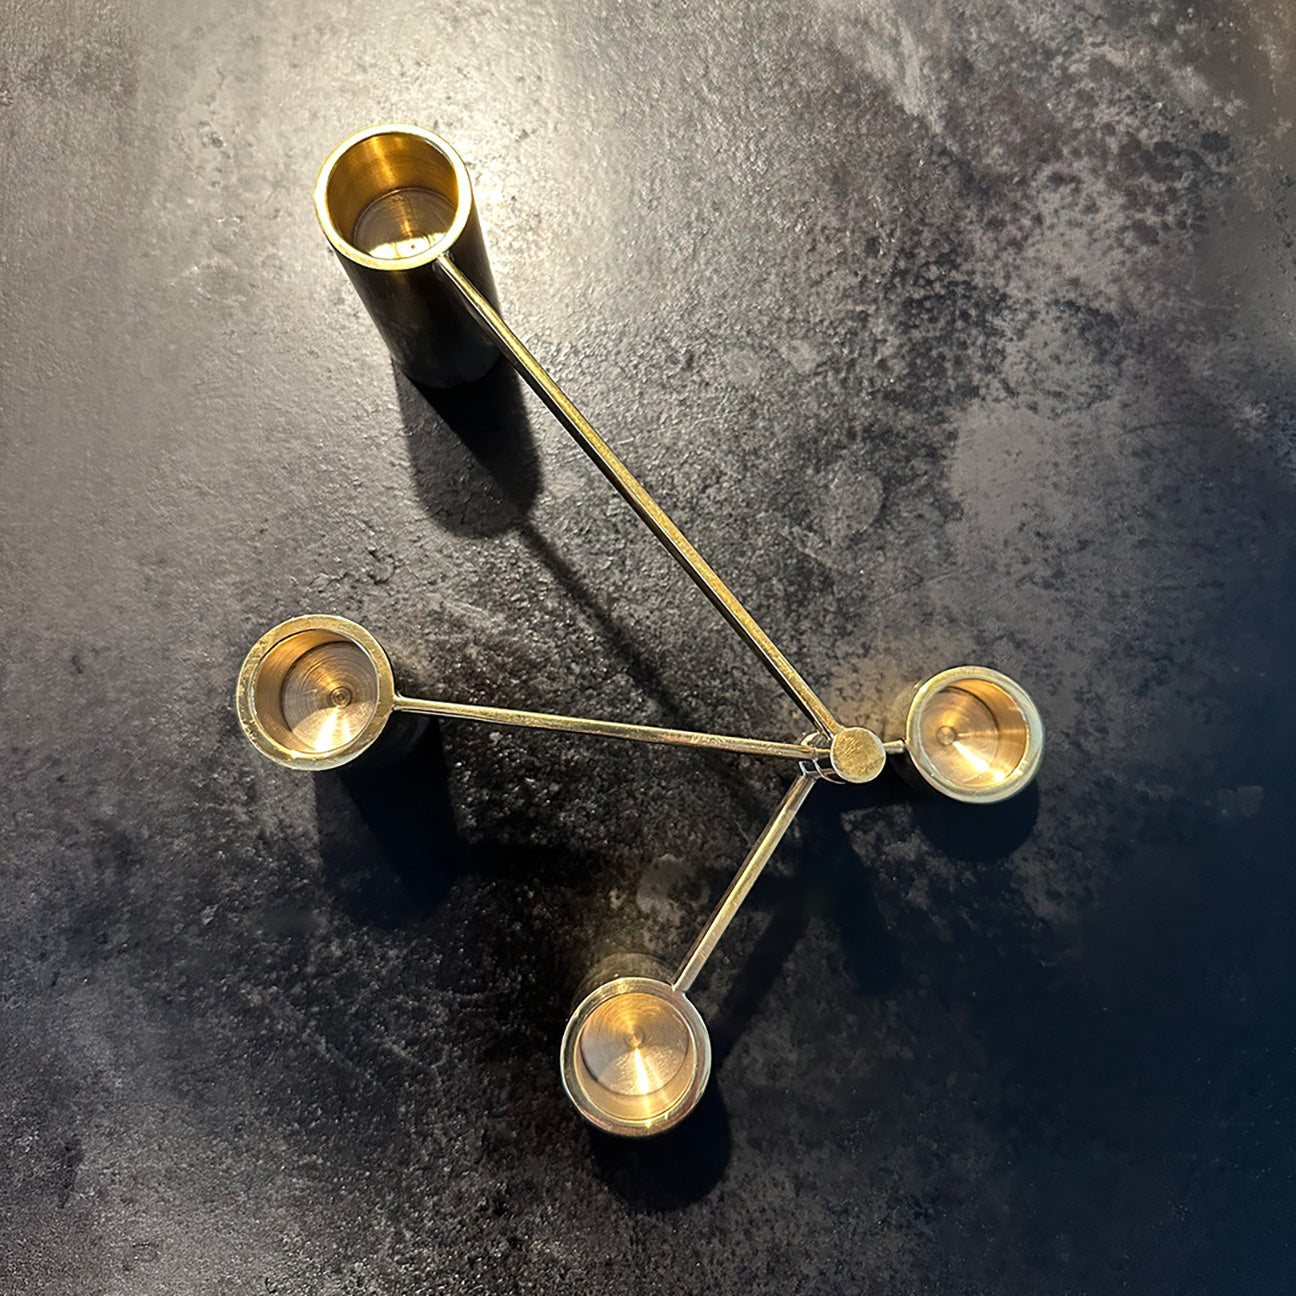 Image of Solid Brass Modular Swing Arm Candelabra sitting on a black cast iron surface.